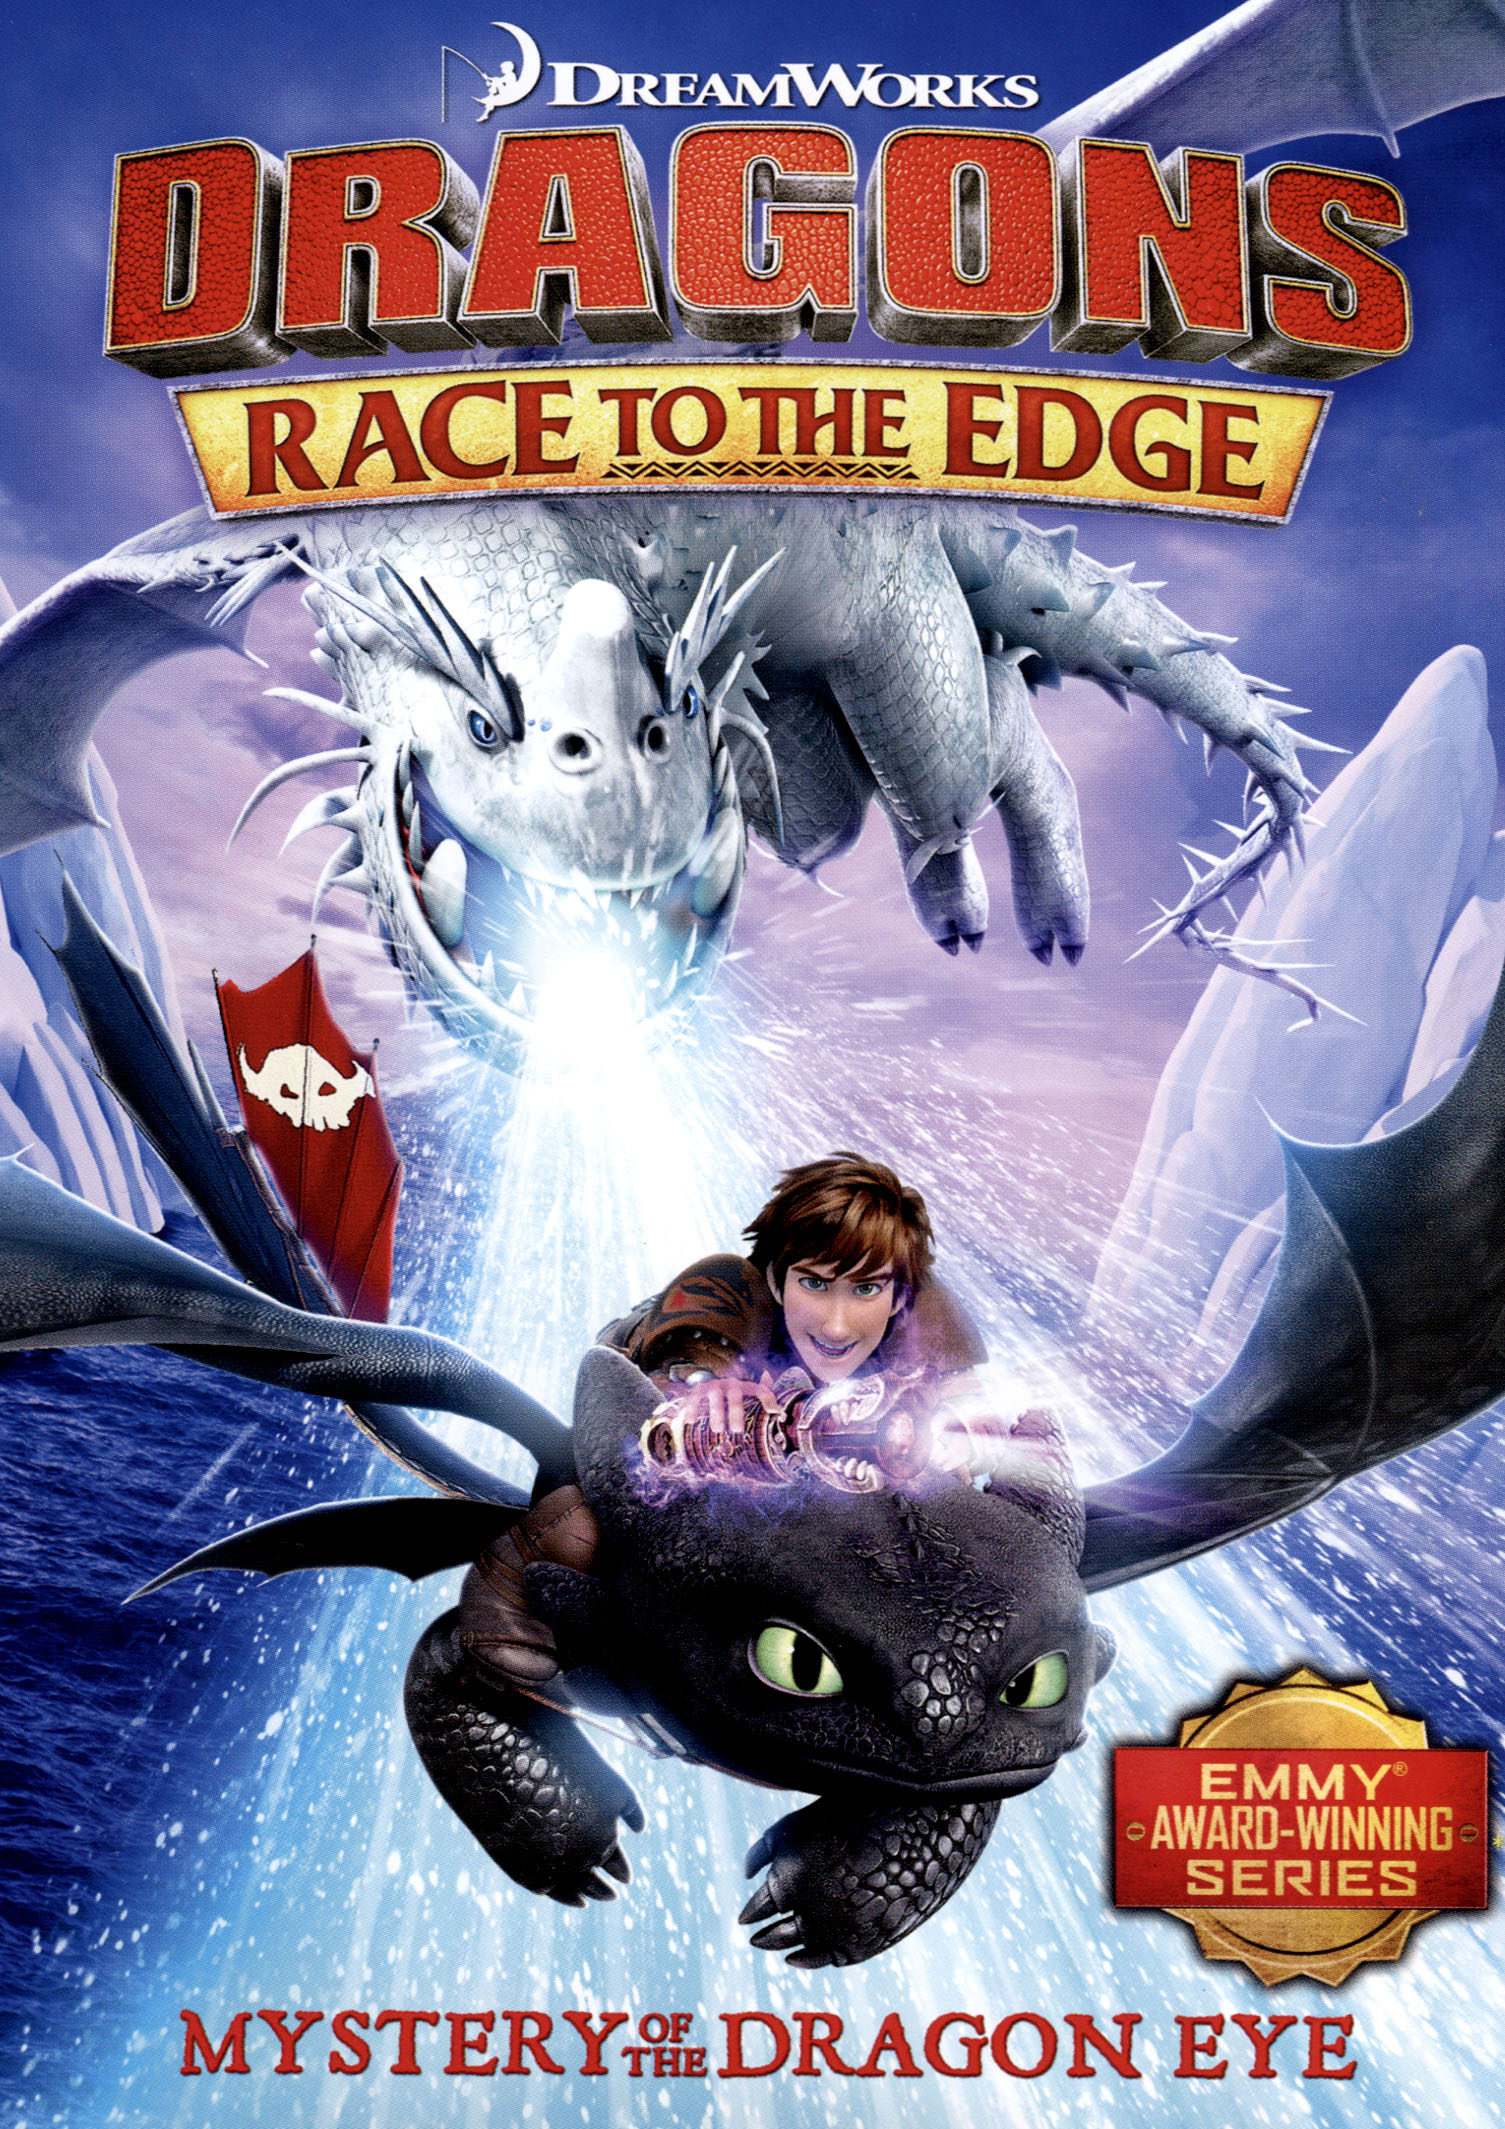 Dragons of the edge